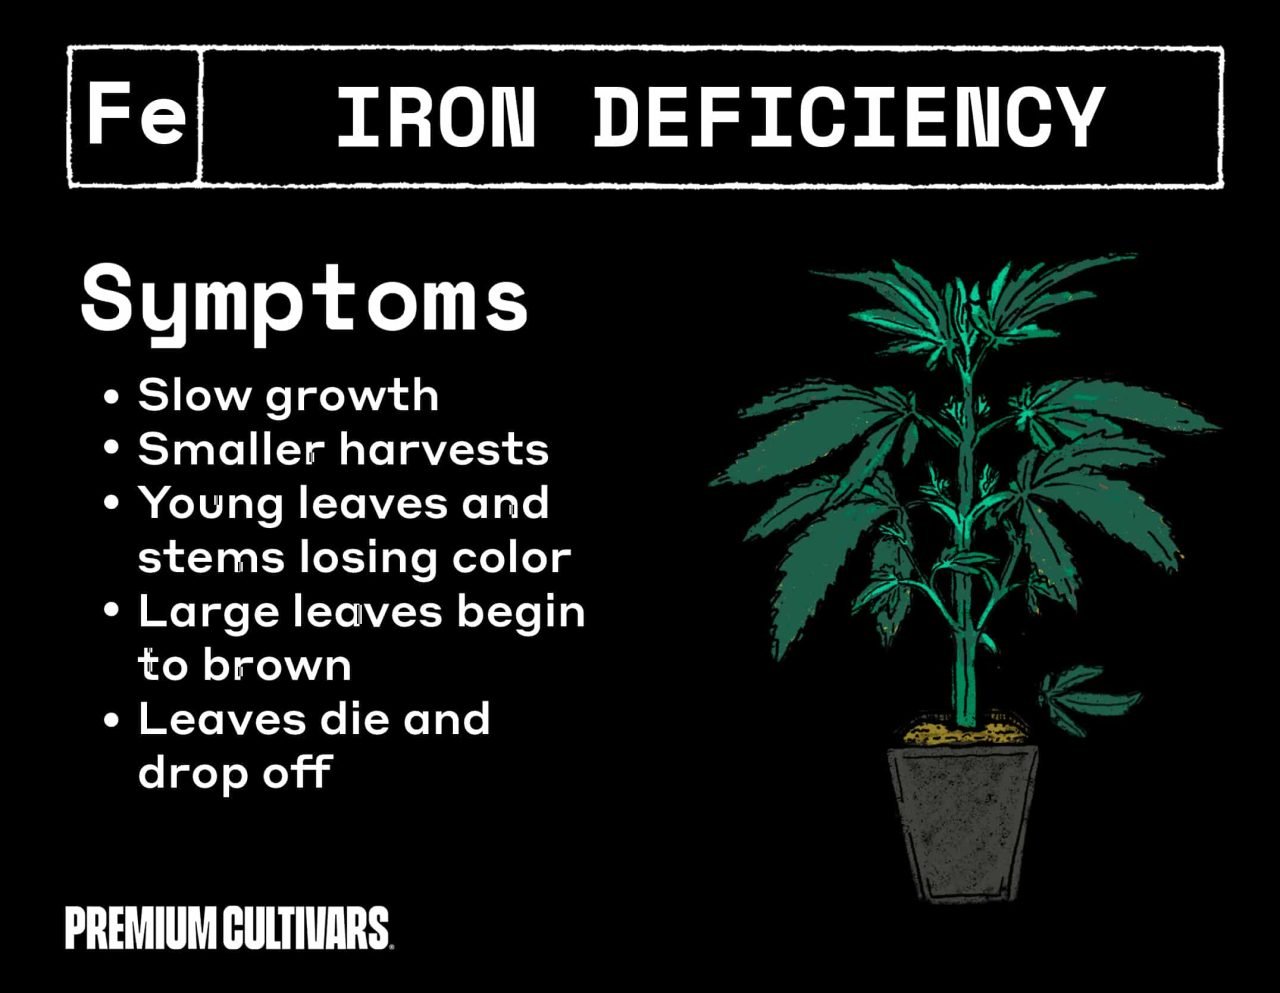 Iron deficiency in cannabis plant symptoms